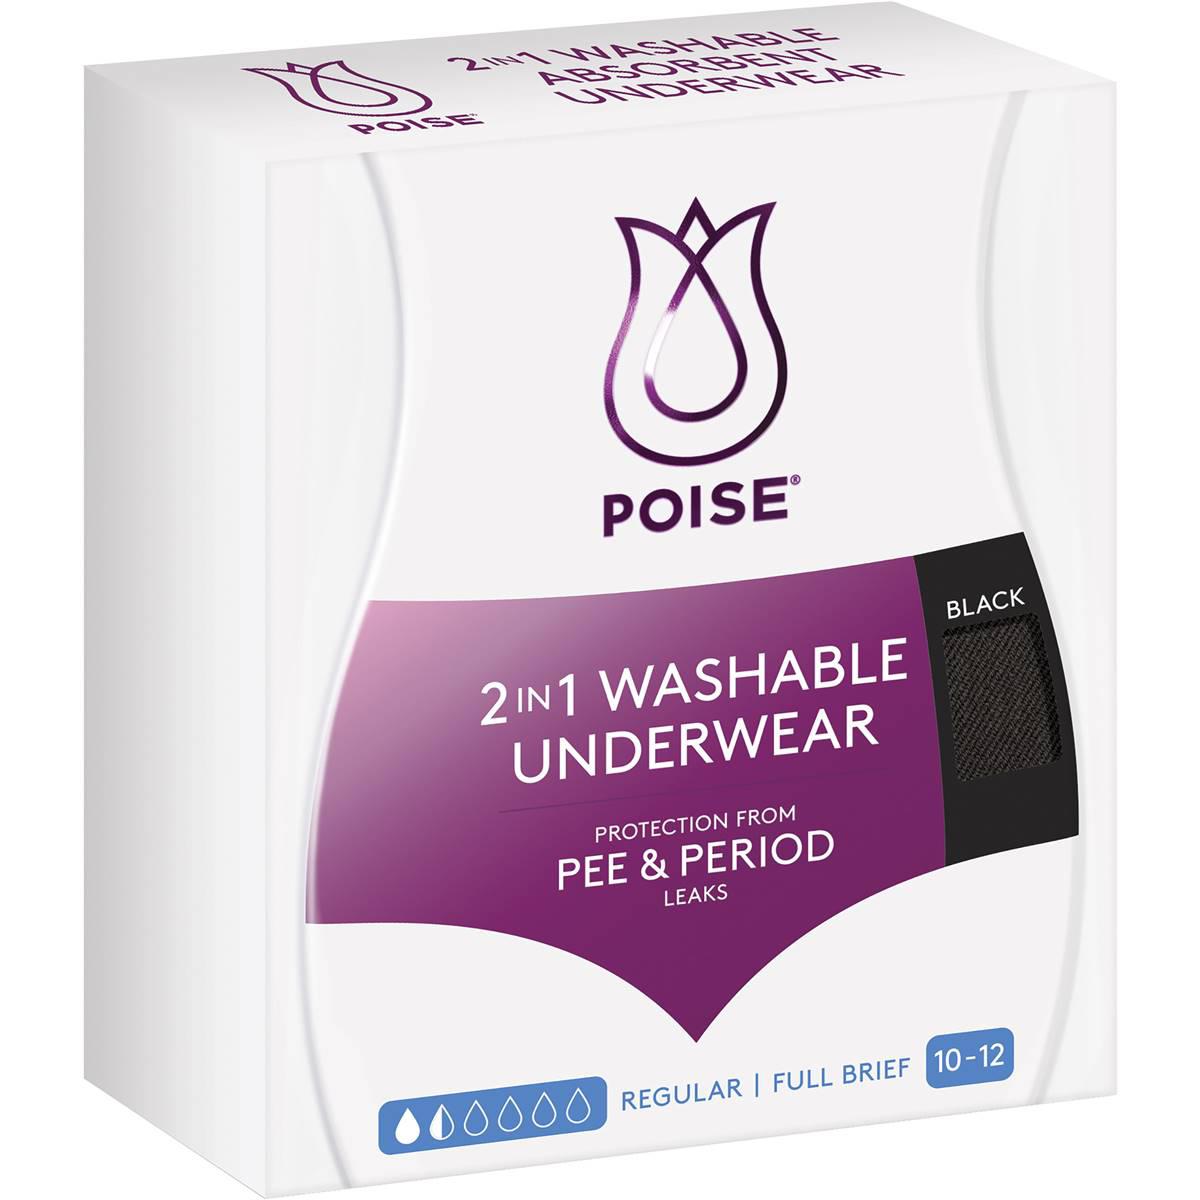 Poise 2-in-1 Period And Incontinence Underwear Black Size 10-12 1 Pack